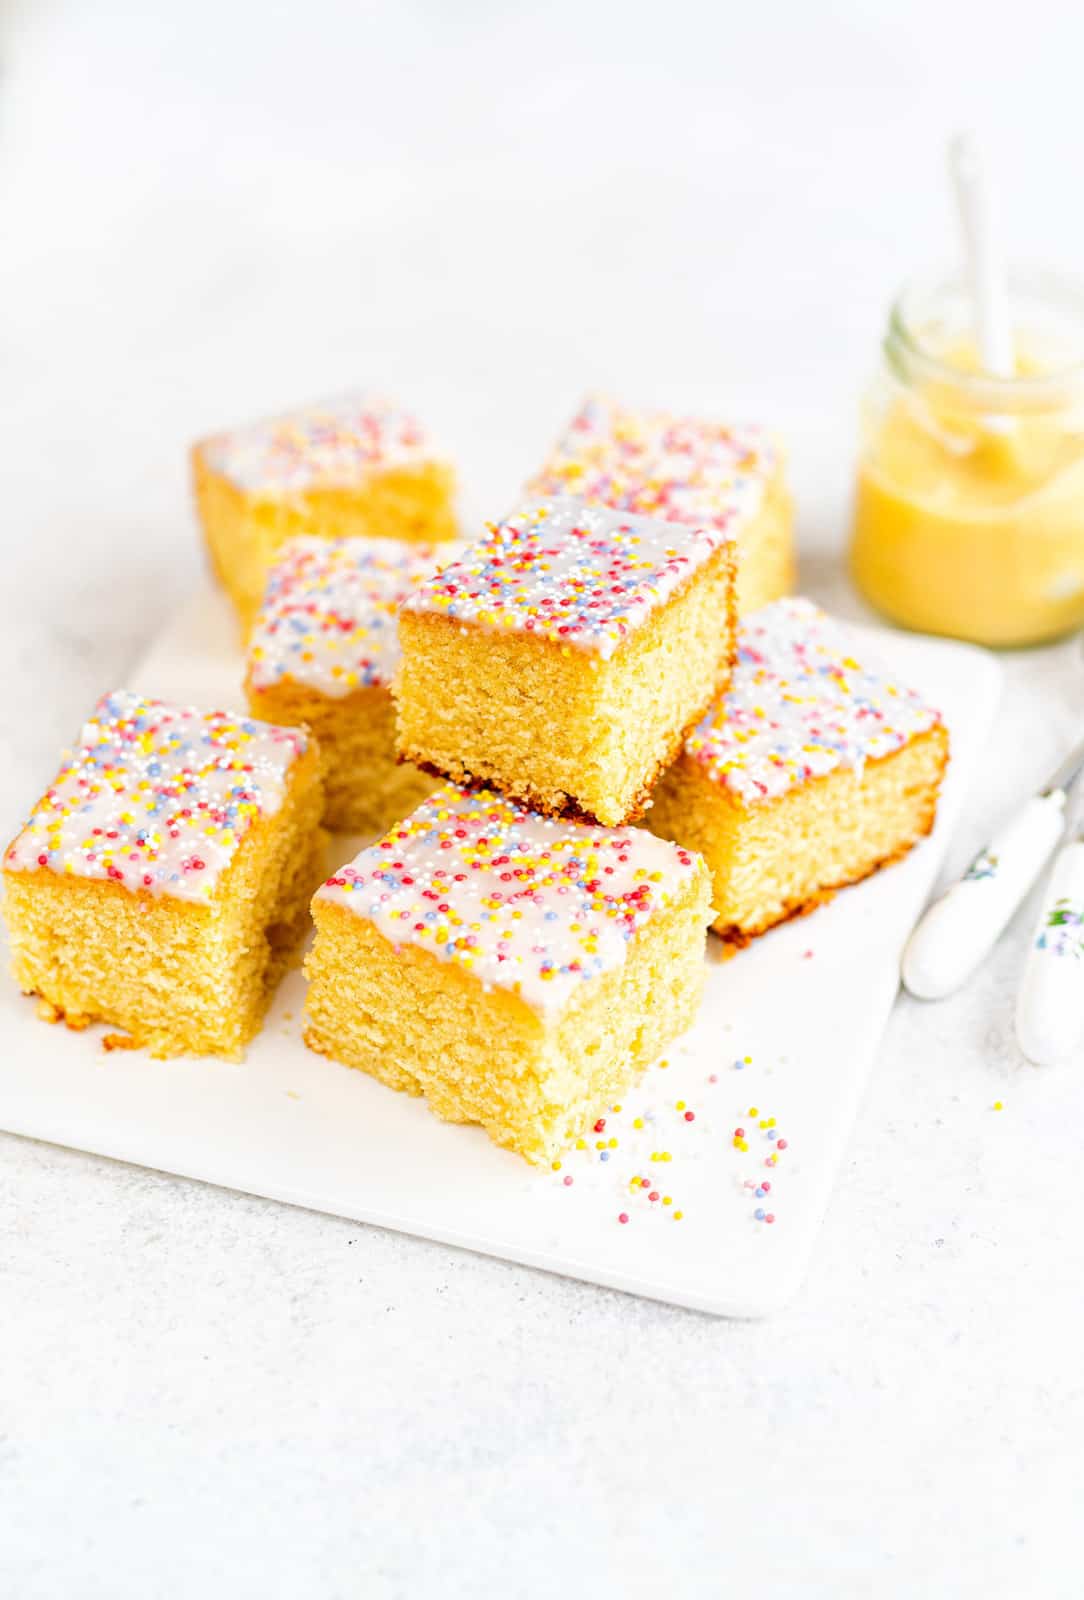 School dinner cake cut into squares covered in white icing and sprinkles